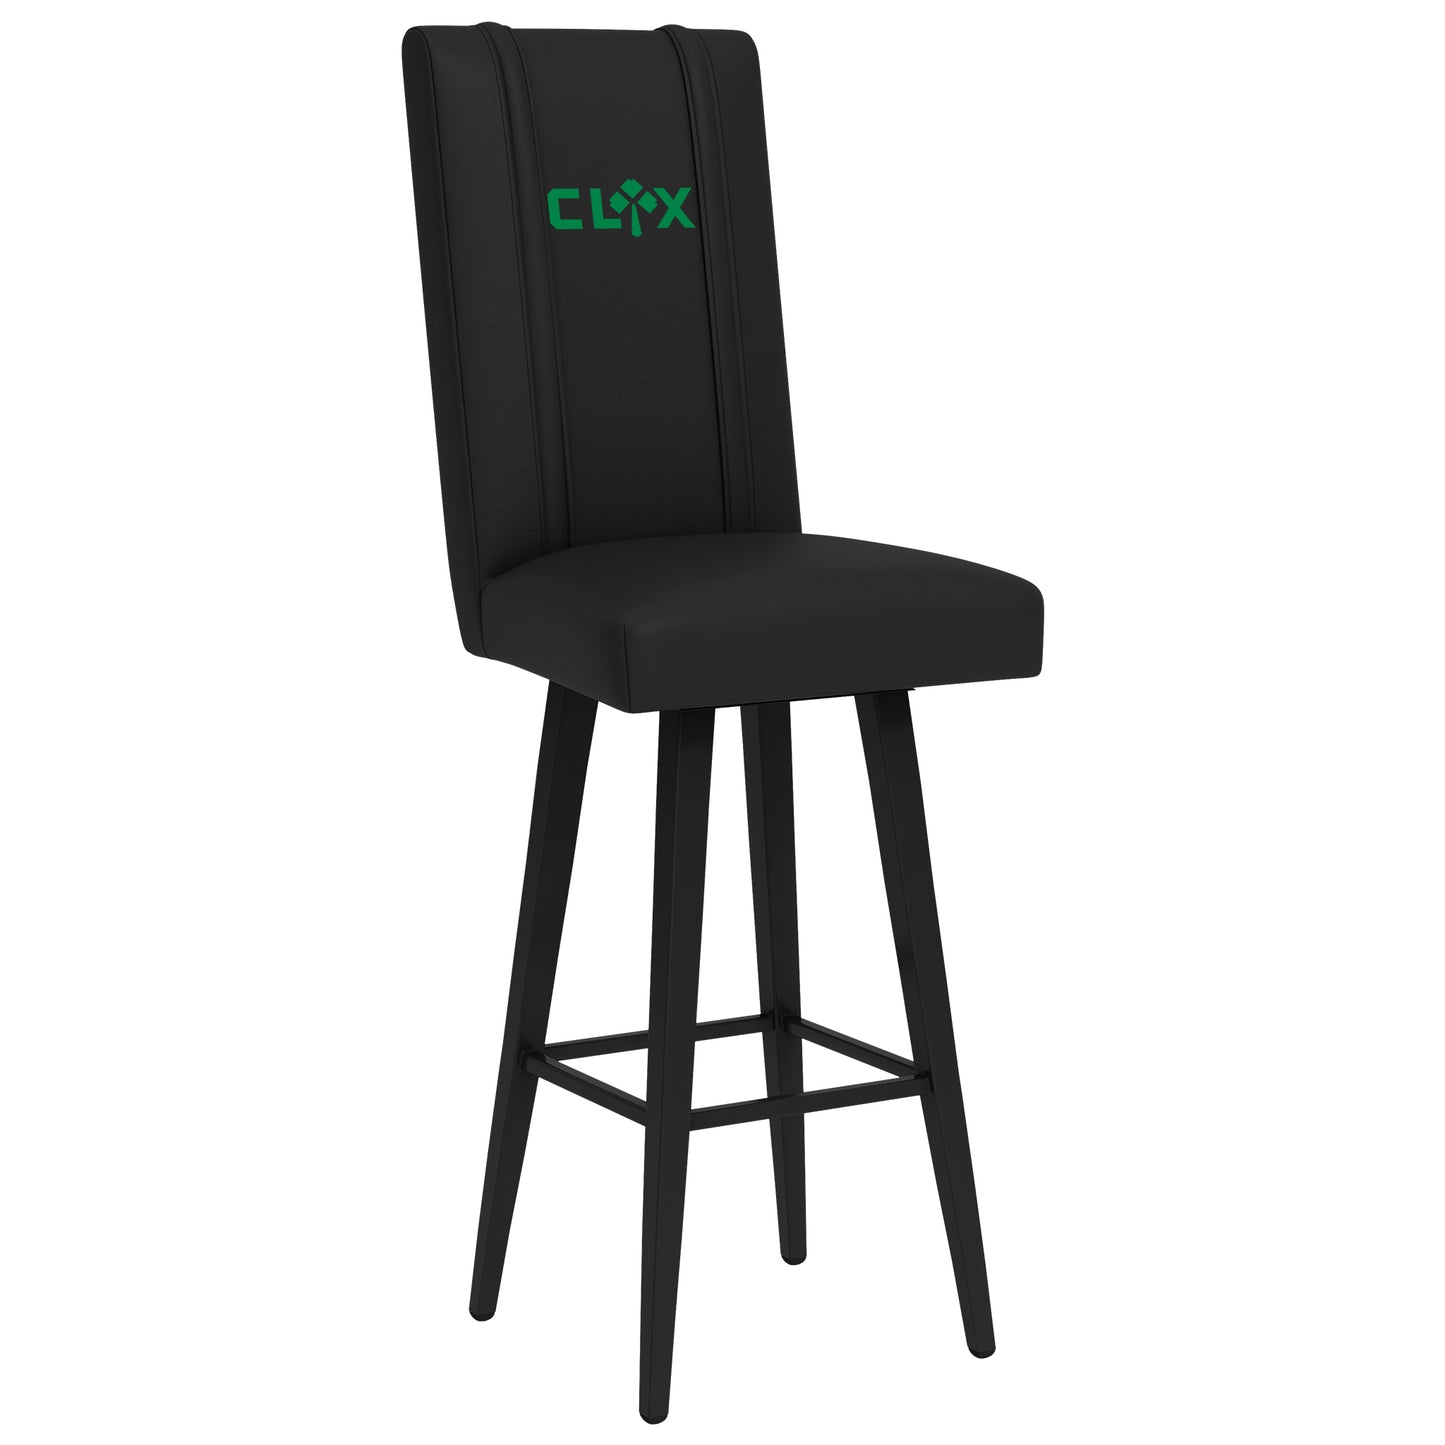 Swivel Bar Stool 2000 with Celtics Crossover Gaming Wordmark Green [CAN ONLY BE SHIPPED TO MASSACHUSETTS]